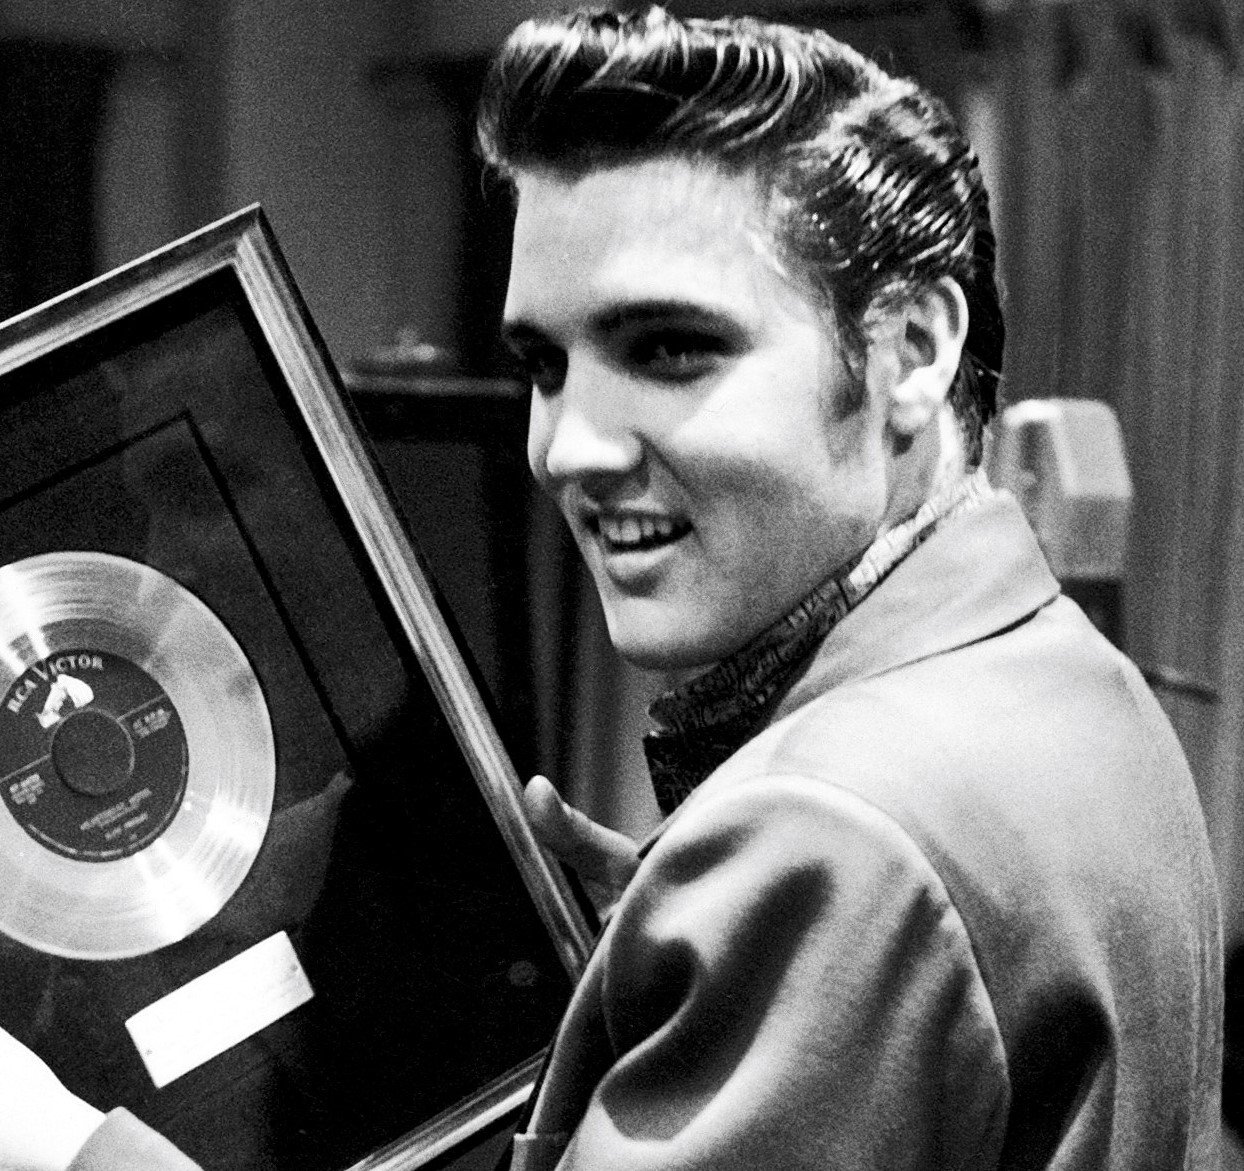 Elvis Presley holding a record